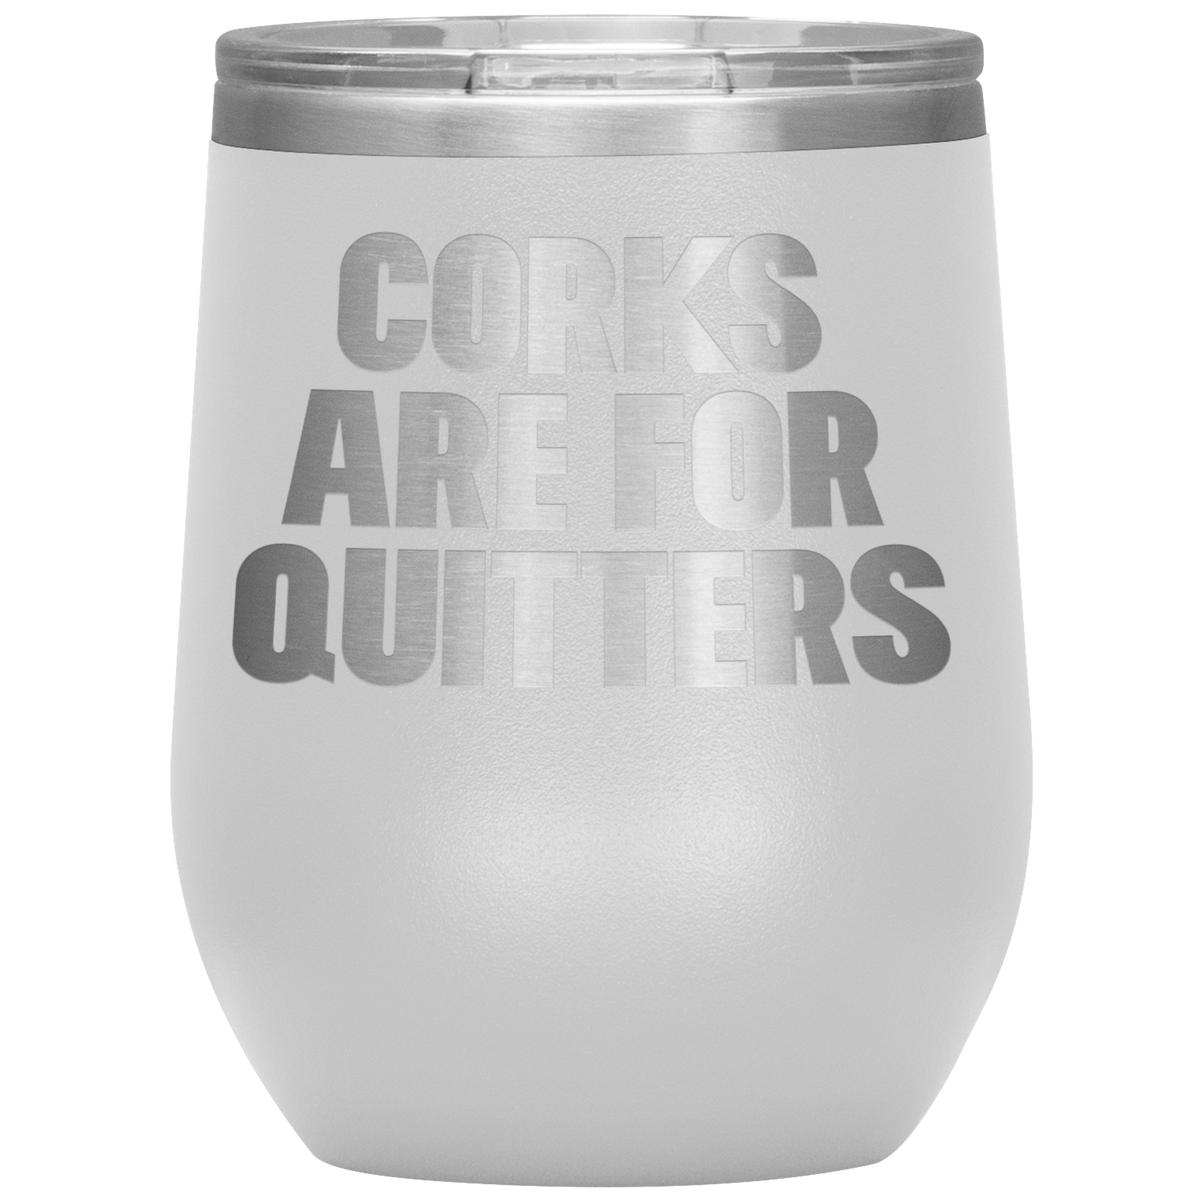 Engraved Wine Cup Corks Are For Quitters